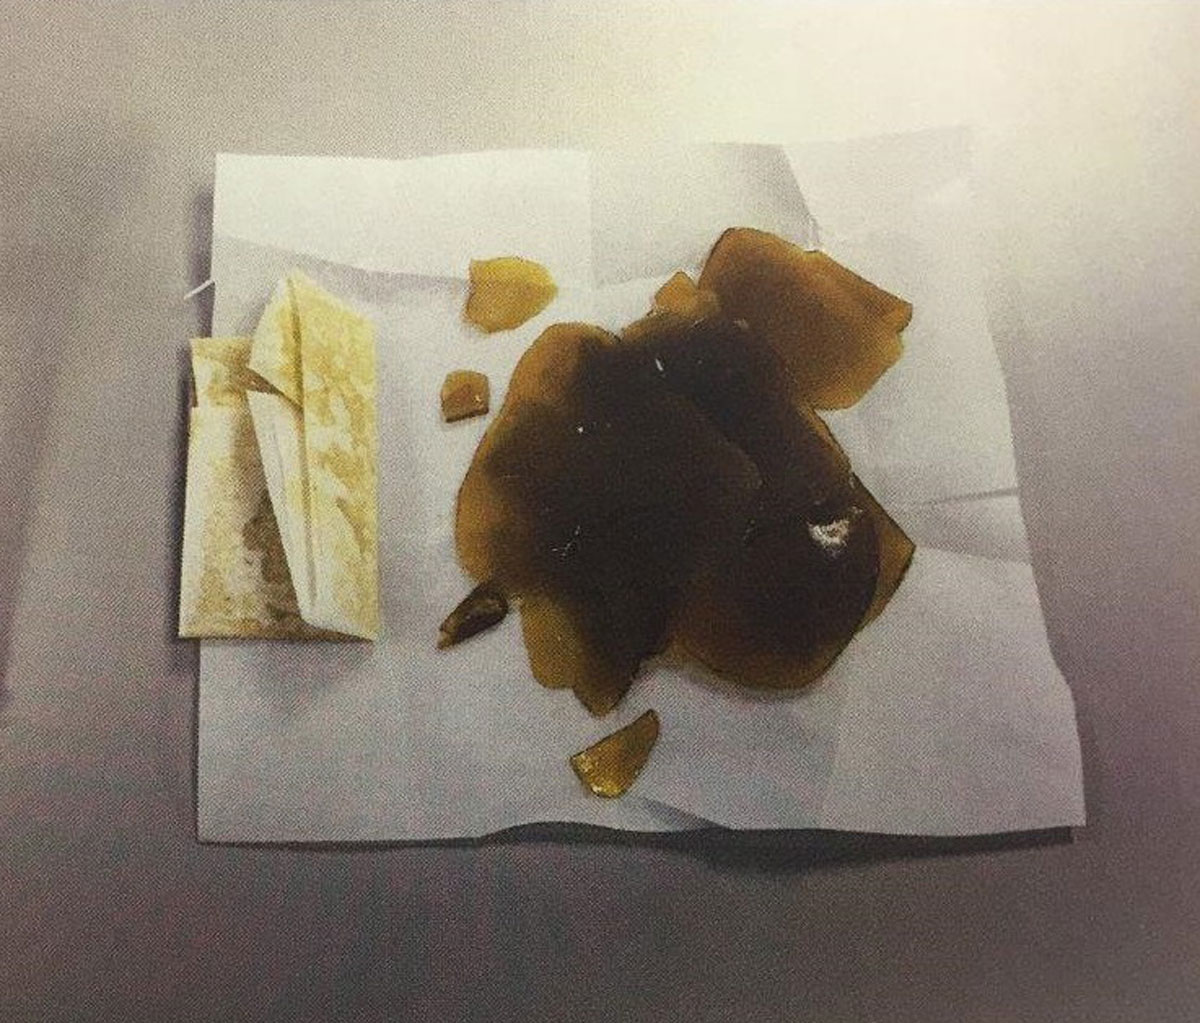 A marijuana derivative commonly known as "shatter." (Courtesy Fairfax County Police Department)